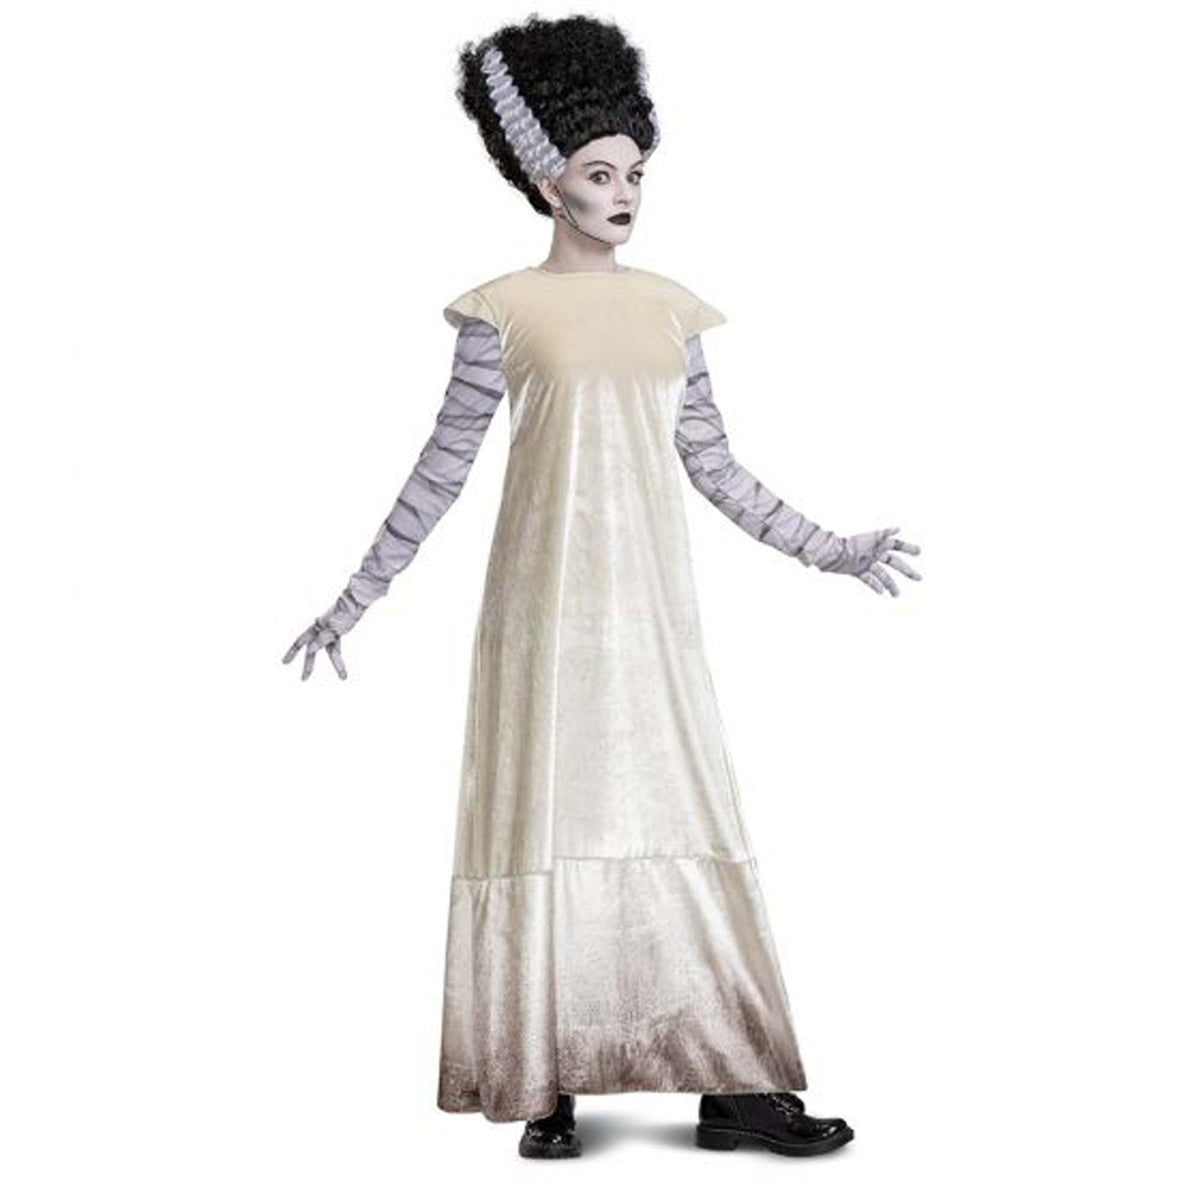 DISGUISE (TOY-SPORT) Costumes Bride of Frankenstein Deluxe Costume for Adults, White Dress